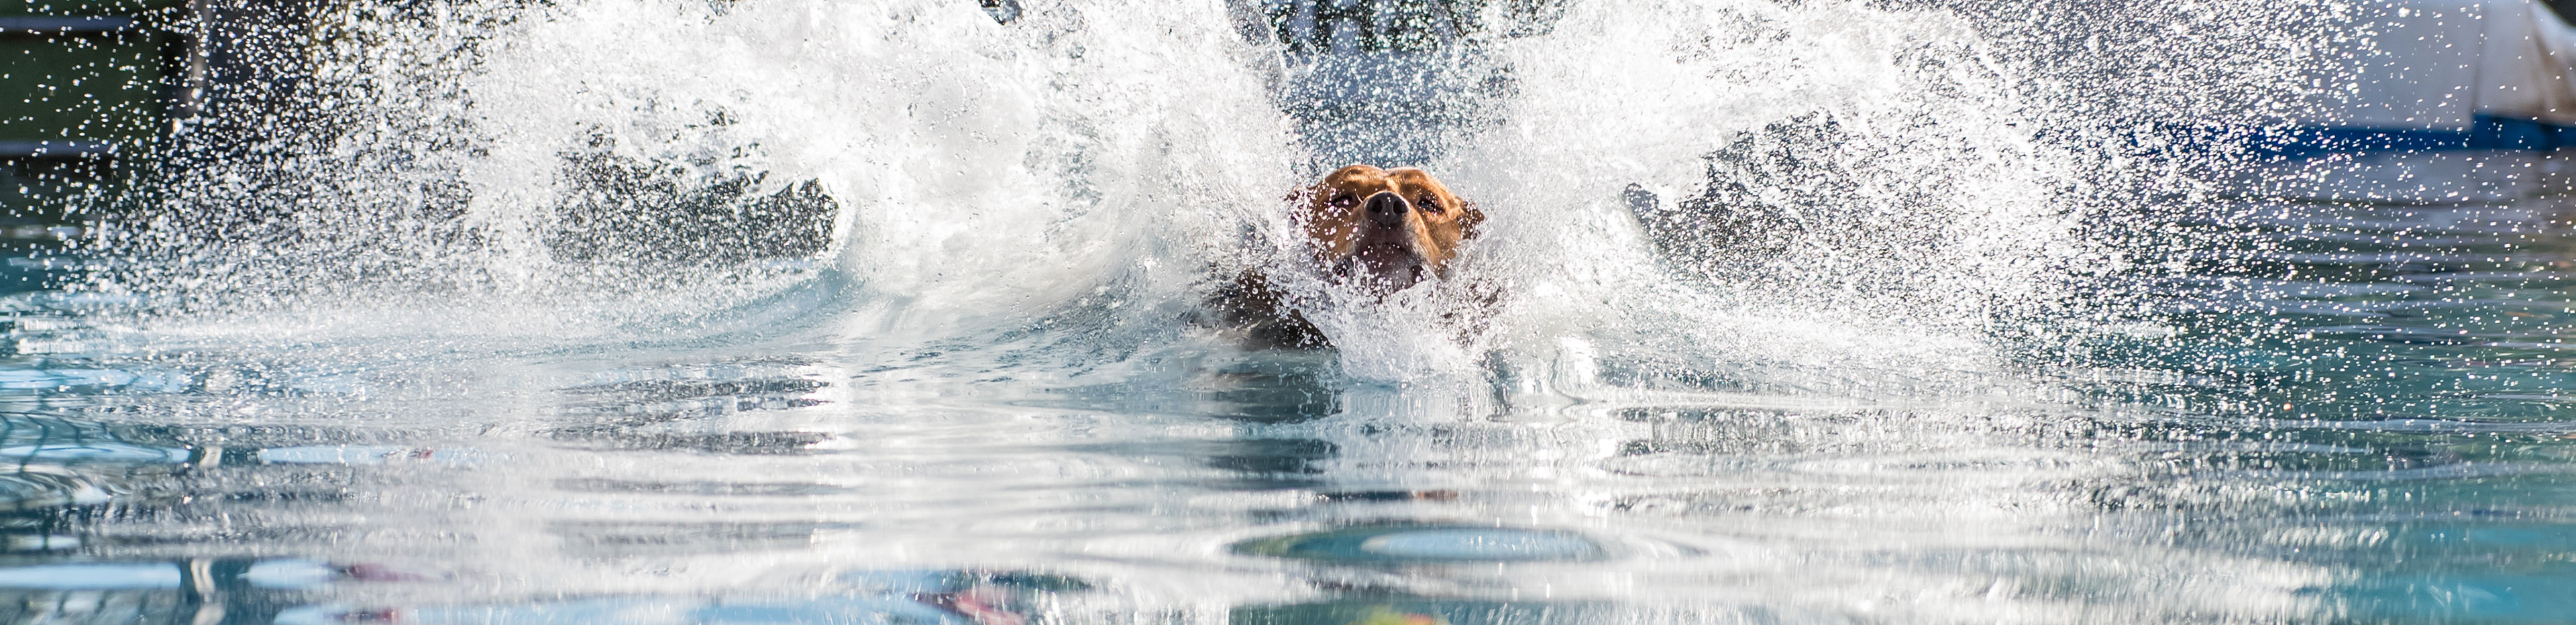 Dog swimming in water with lots of splashes